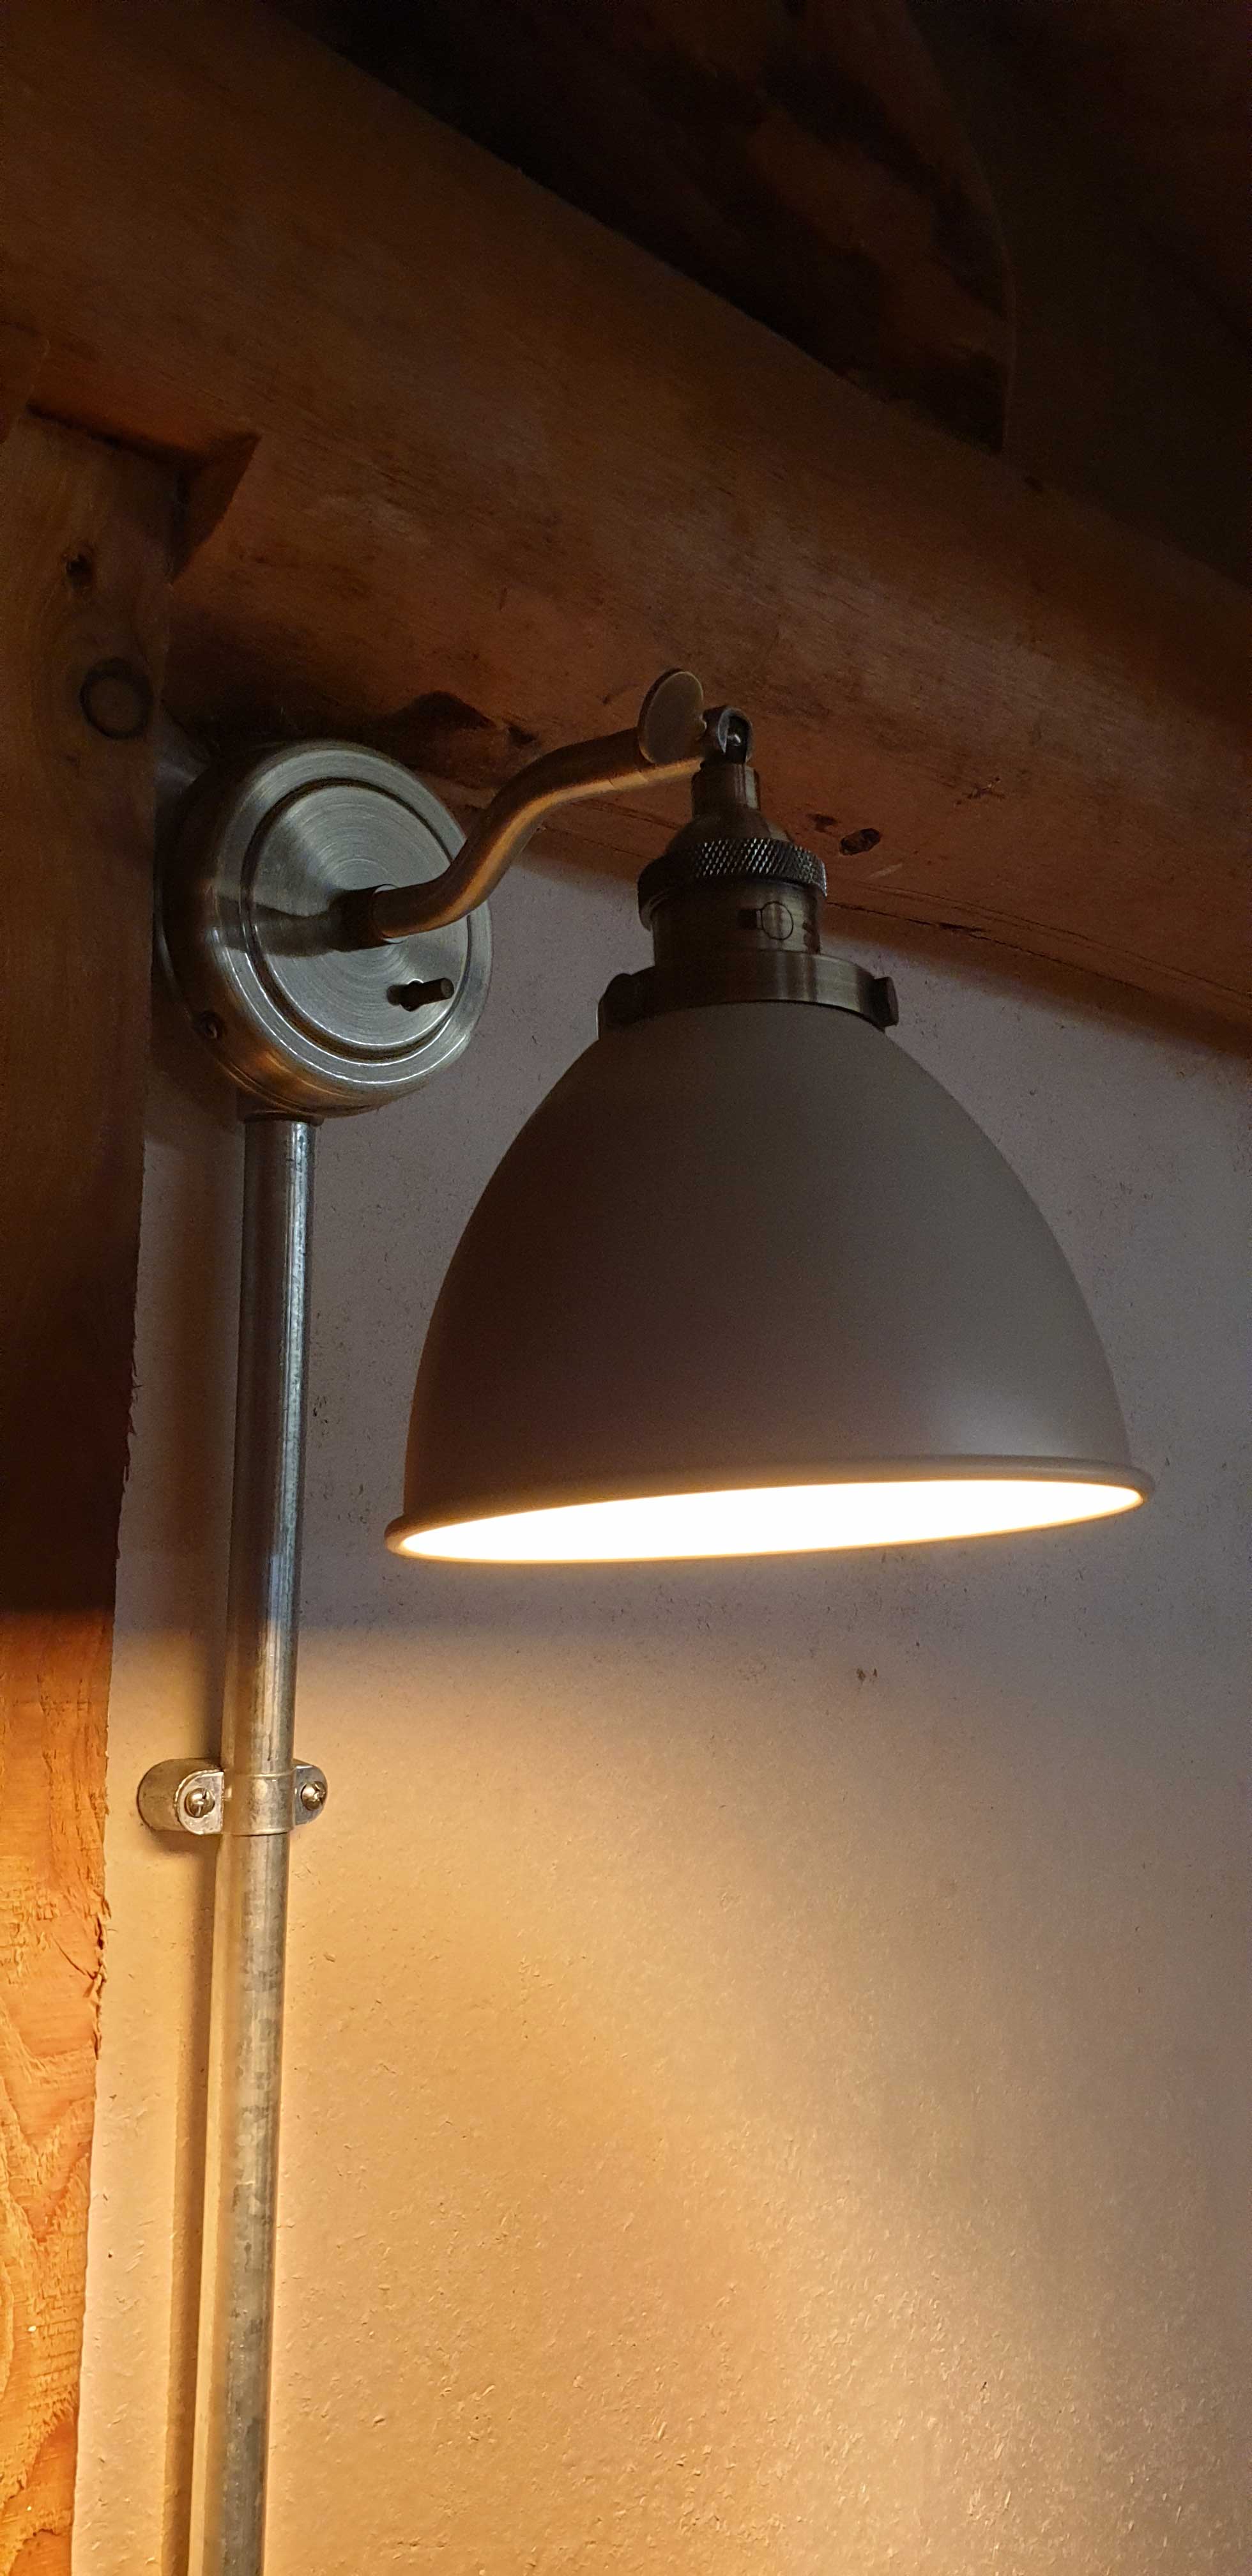 Cleverspark Electrical Installers and Electrians based in Bristol, Bath and the South West of England - An example of interior light/lighing fixture/fitting